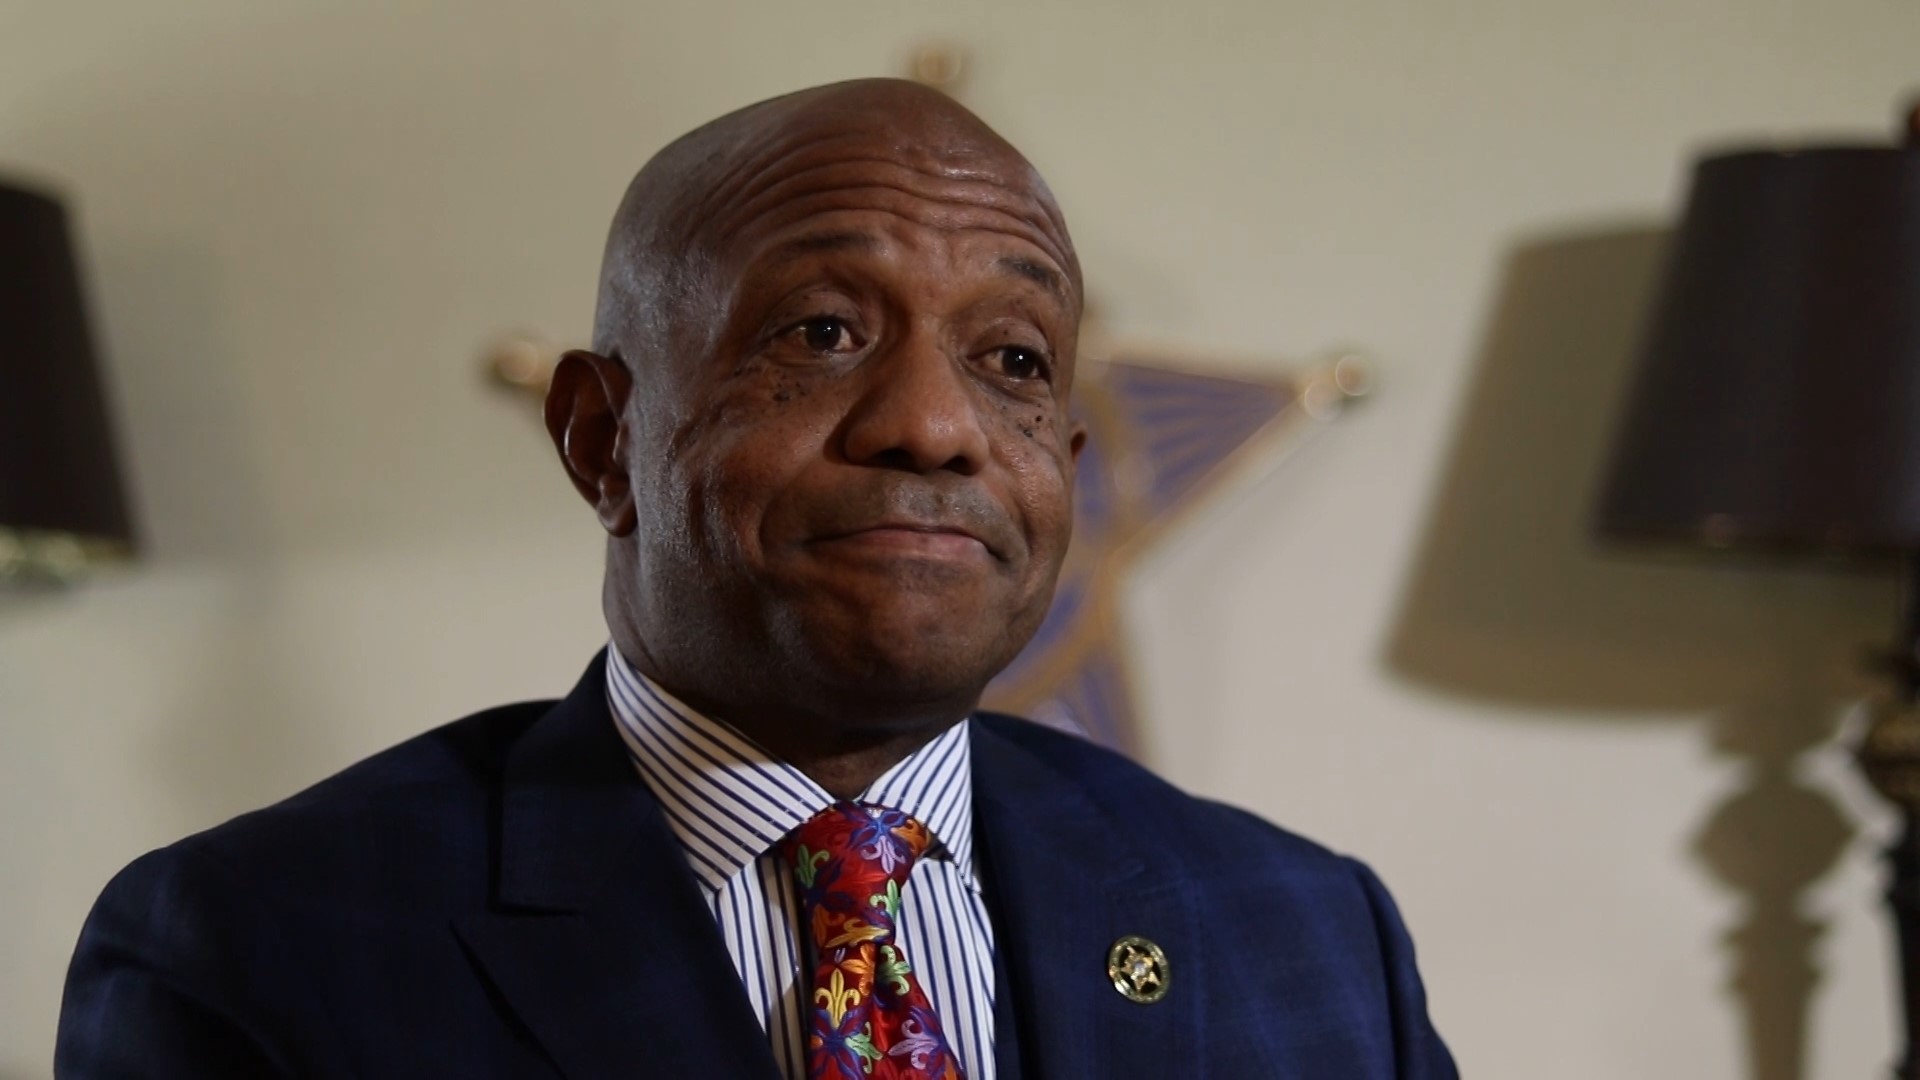 In an extended interview with WCNC Charlotte, Mecklenburg County Sheriff Garry McFadden responds to complaints his jail staff is dangerously understaffed.